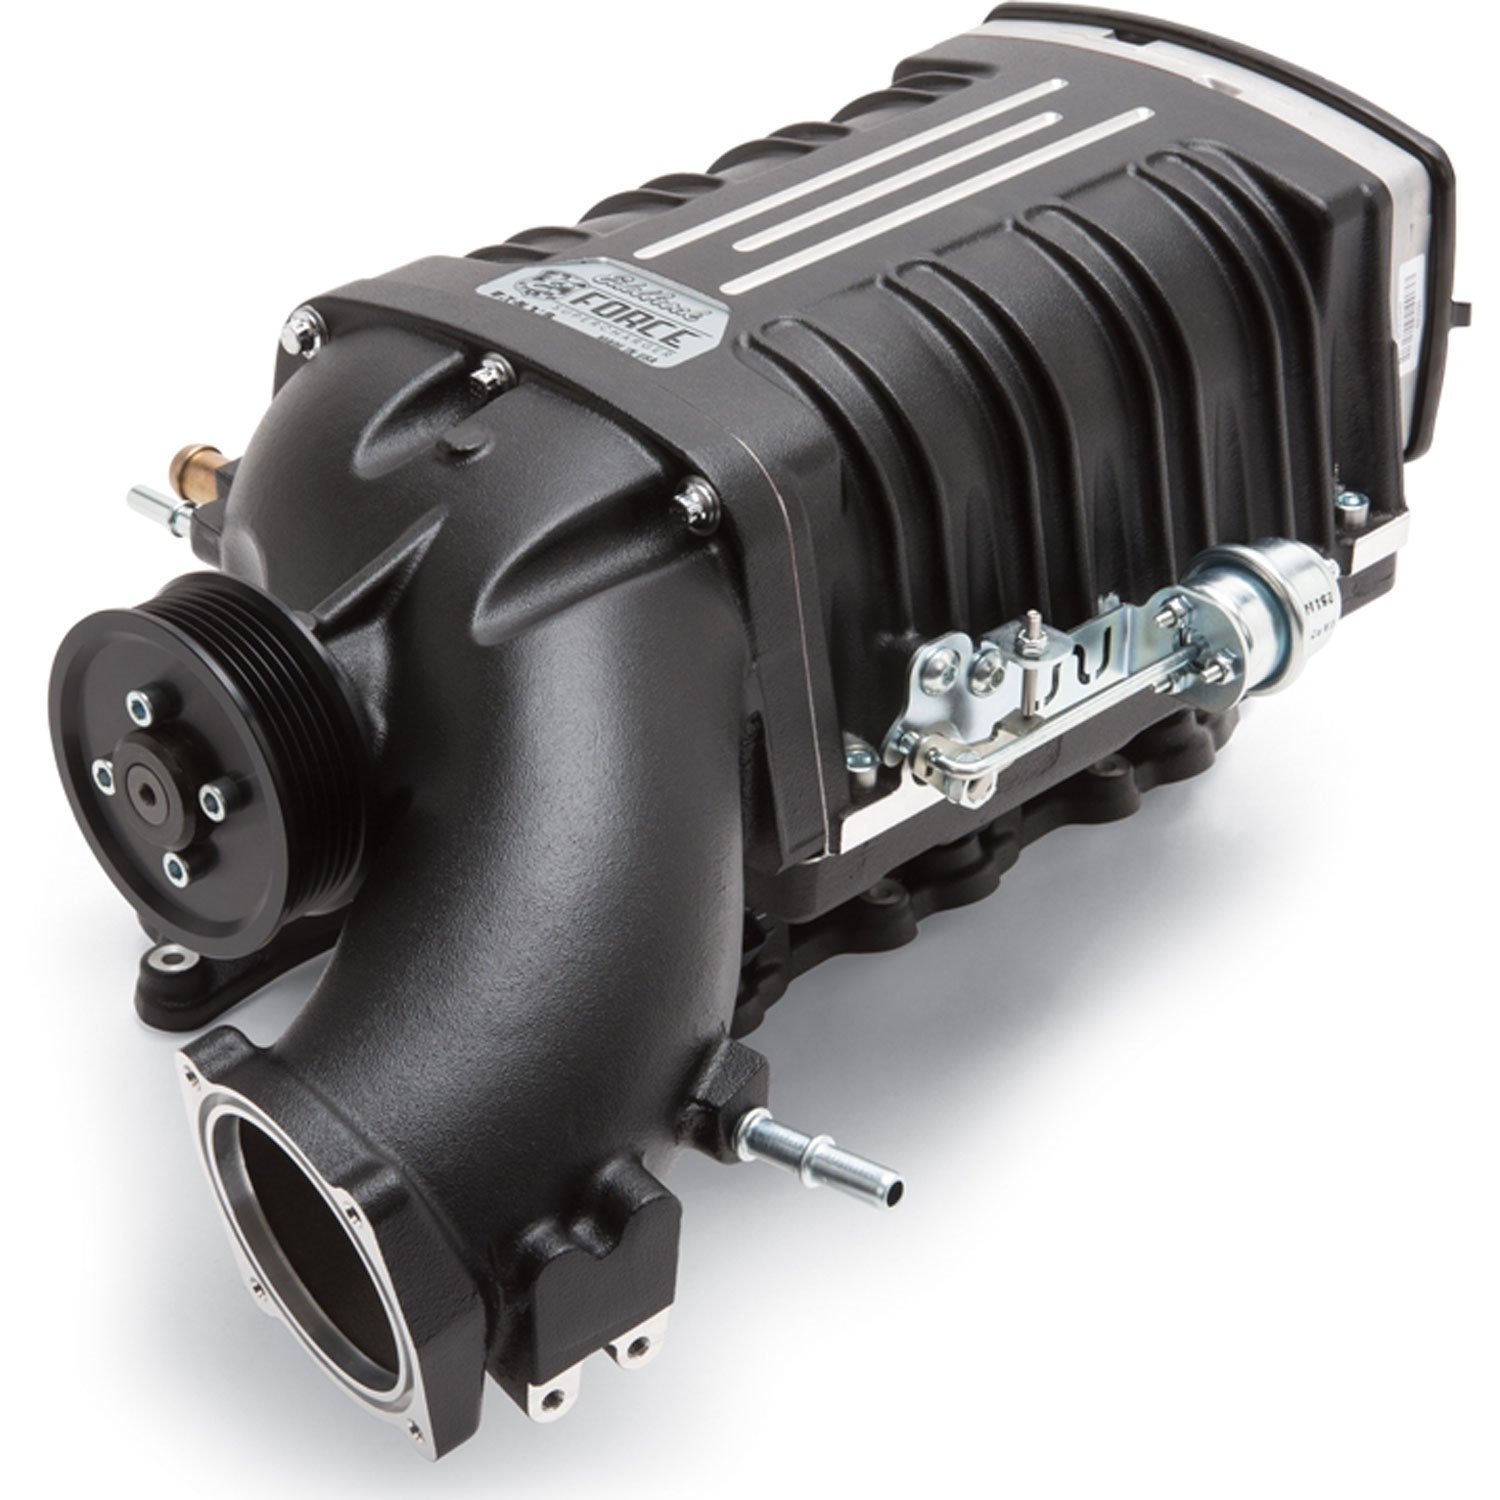 Stage-1 Street Supercharger System for 2012-2014 Jeep Wrangler JK 3.6L Engine w/Tune